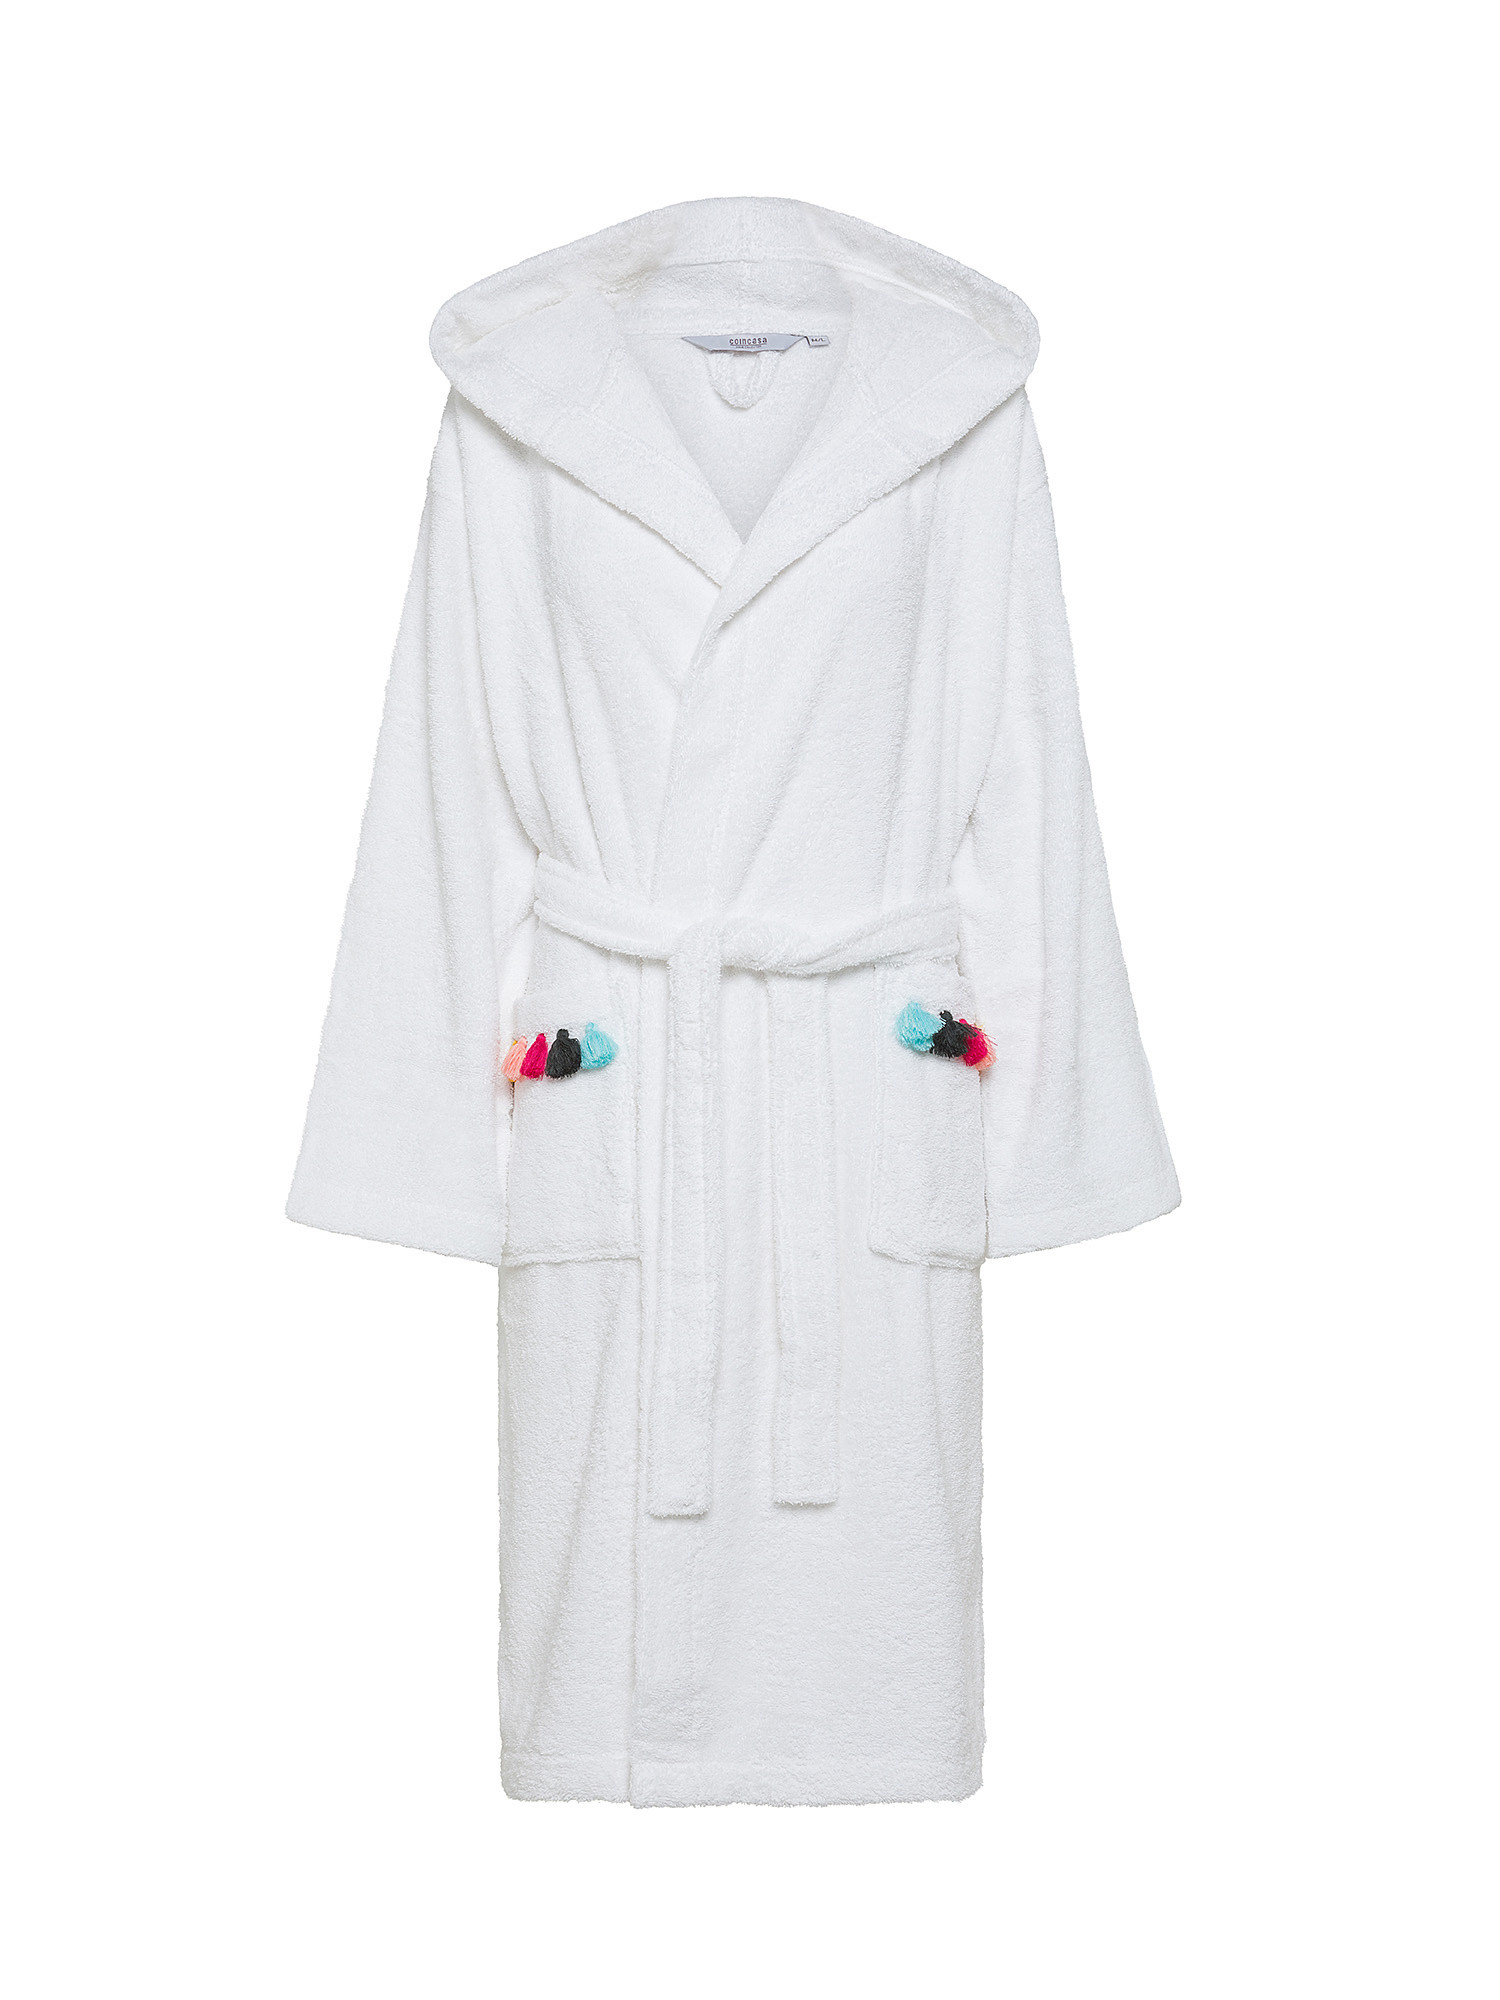 Terry cotton bathrobe with applications, White, large image number 0